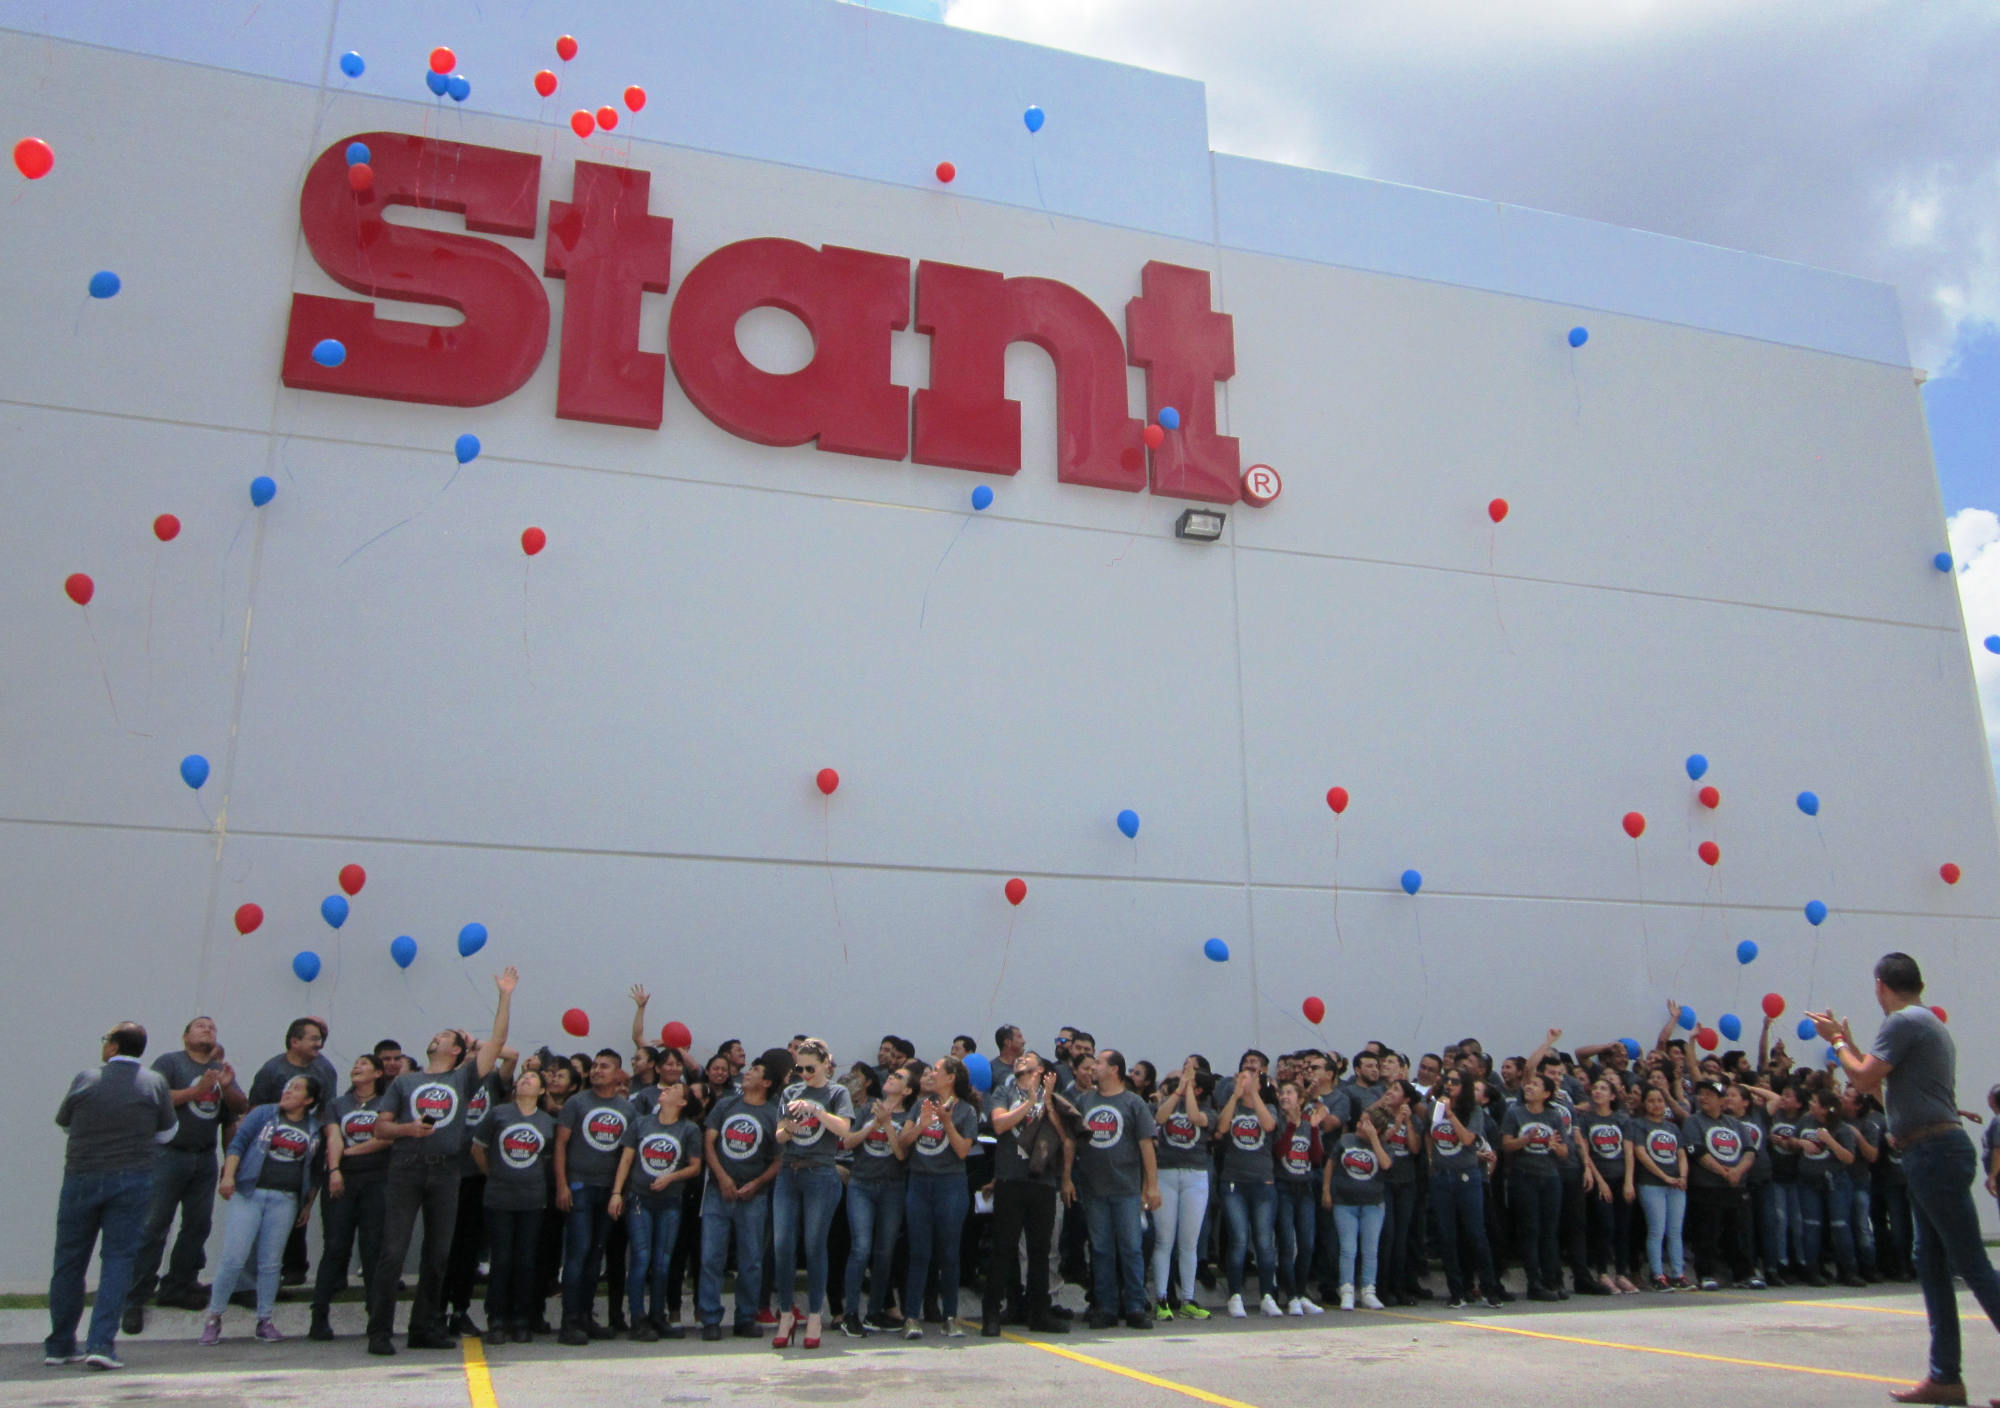 Stant continues worldwide celebration in Mexico   